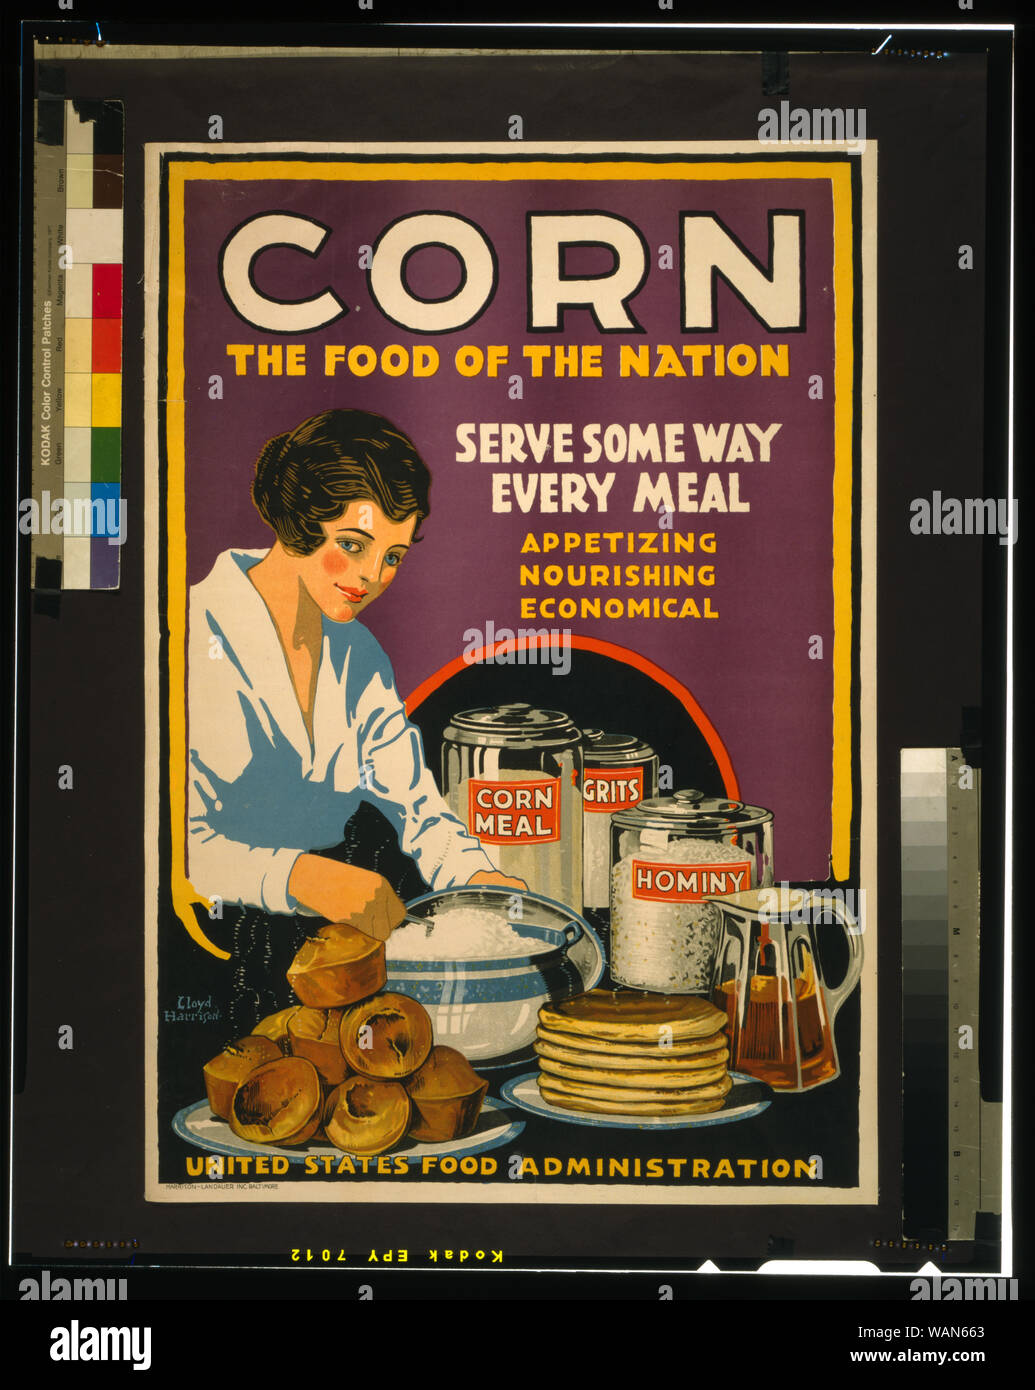 Corn - the food of the nation Abstract: Poster showing a woman serving muffins, pancakes, and grits, with cannisters on the table labeled corn meal, grits, and hominy. Stock Photo